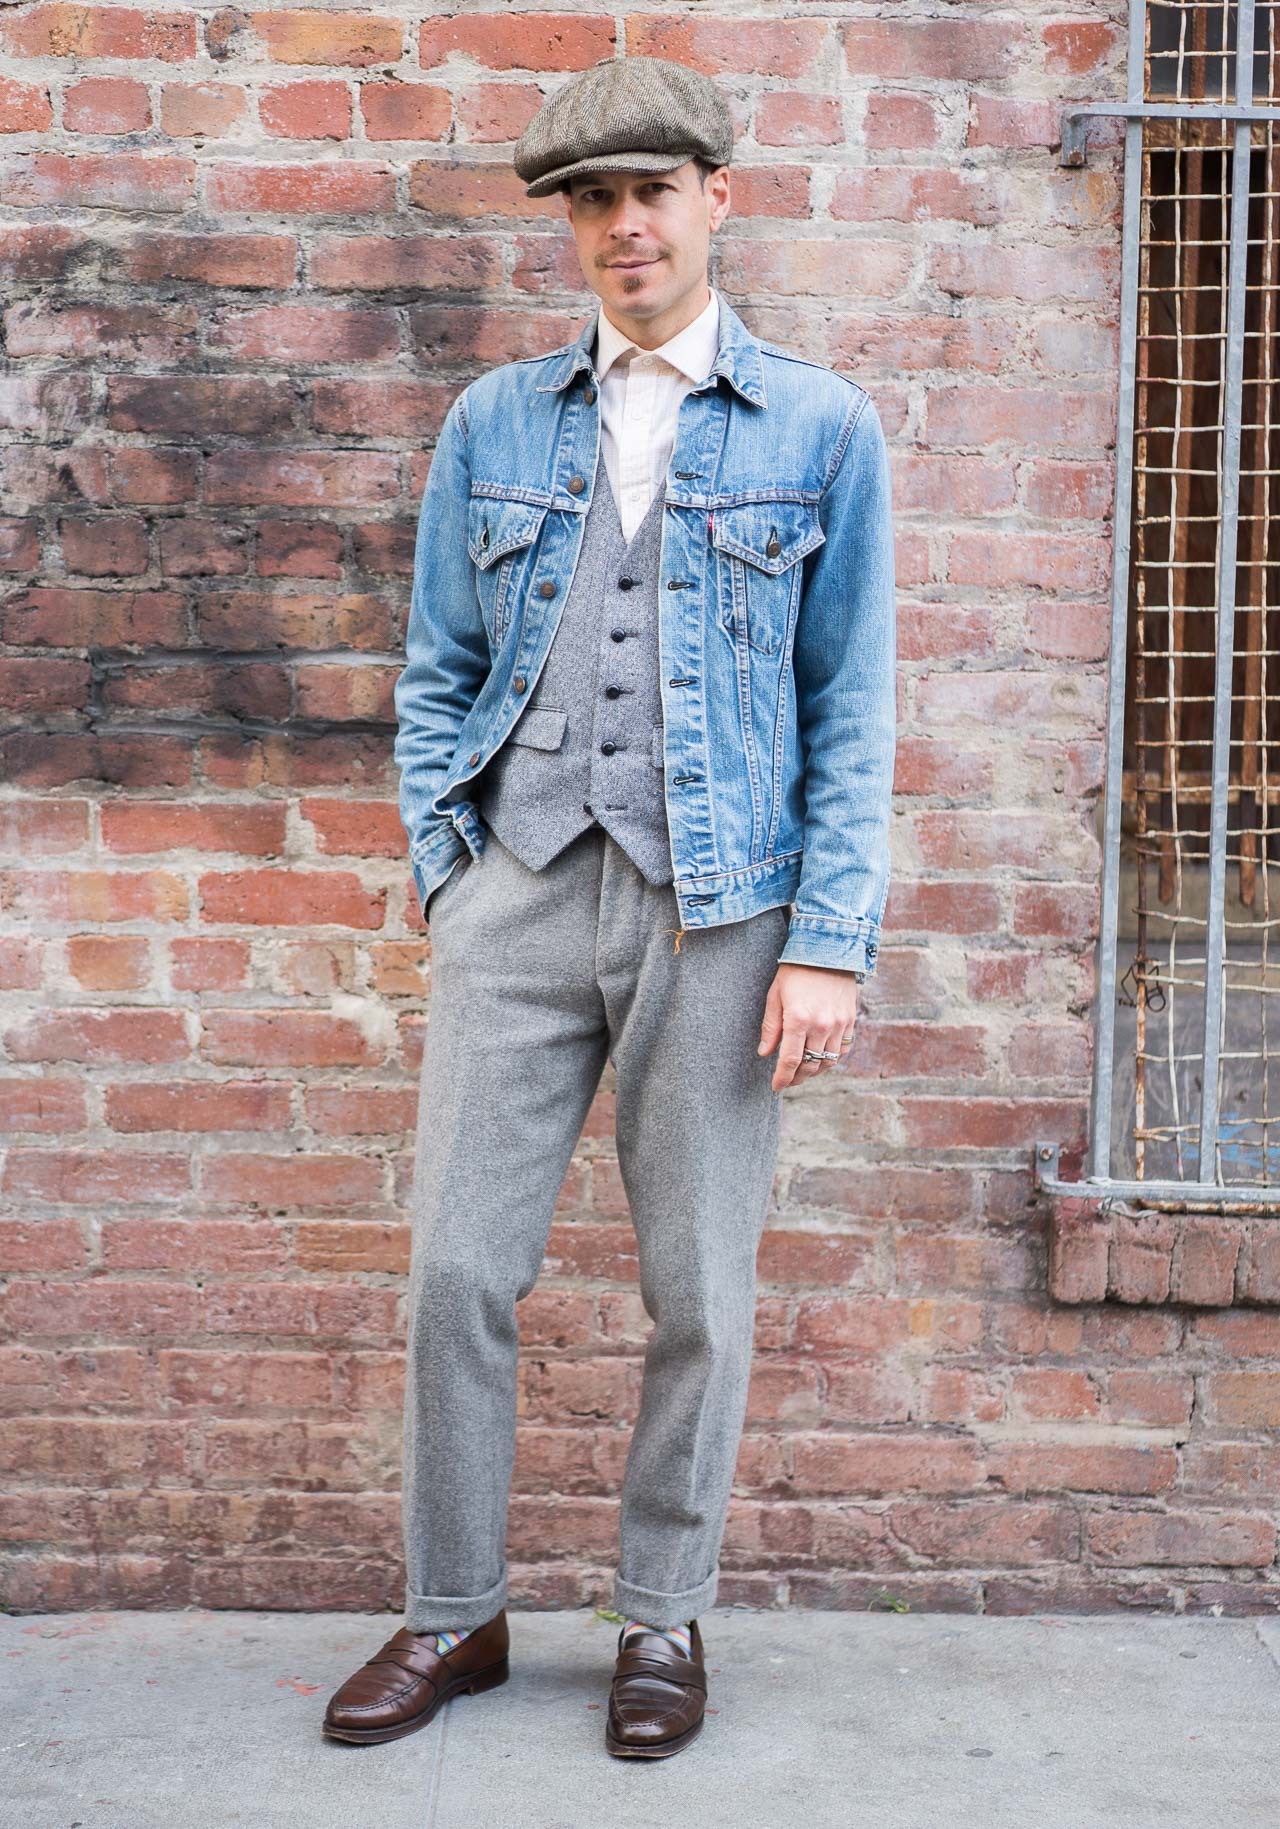 SF Looks — Jay, 37 “I’m wearing bespoke trousers, shirt and...